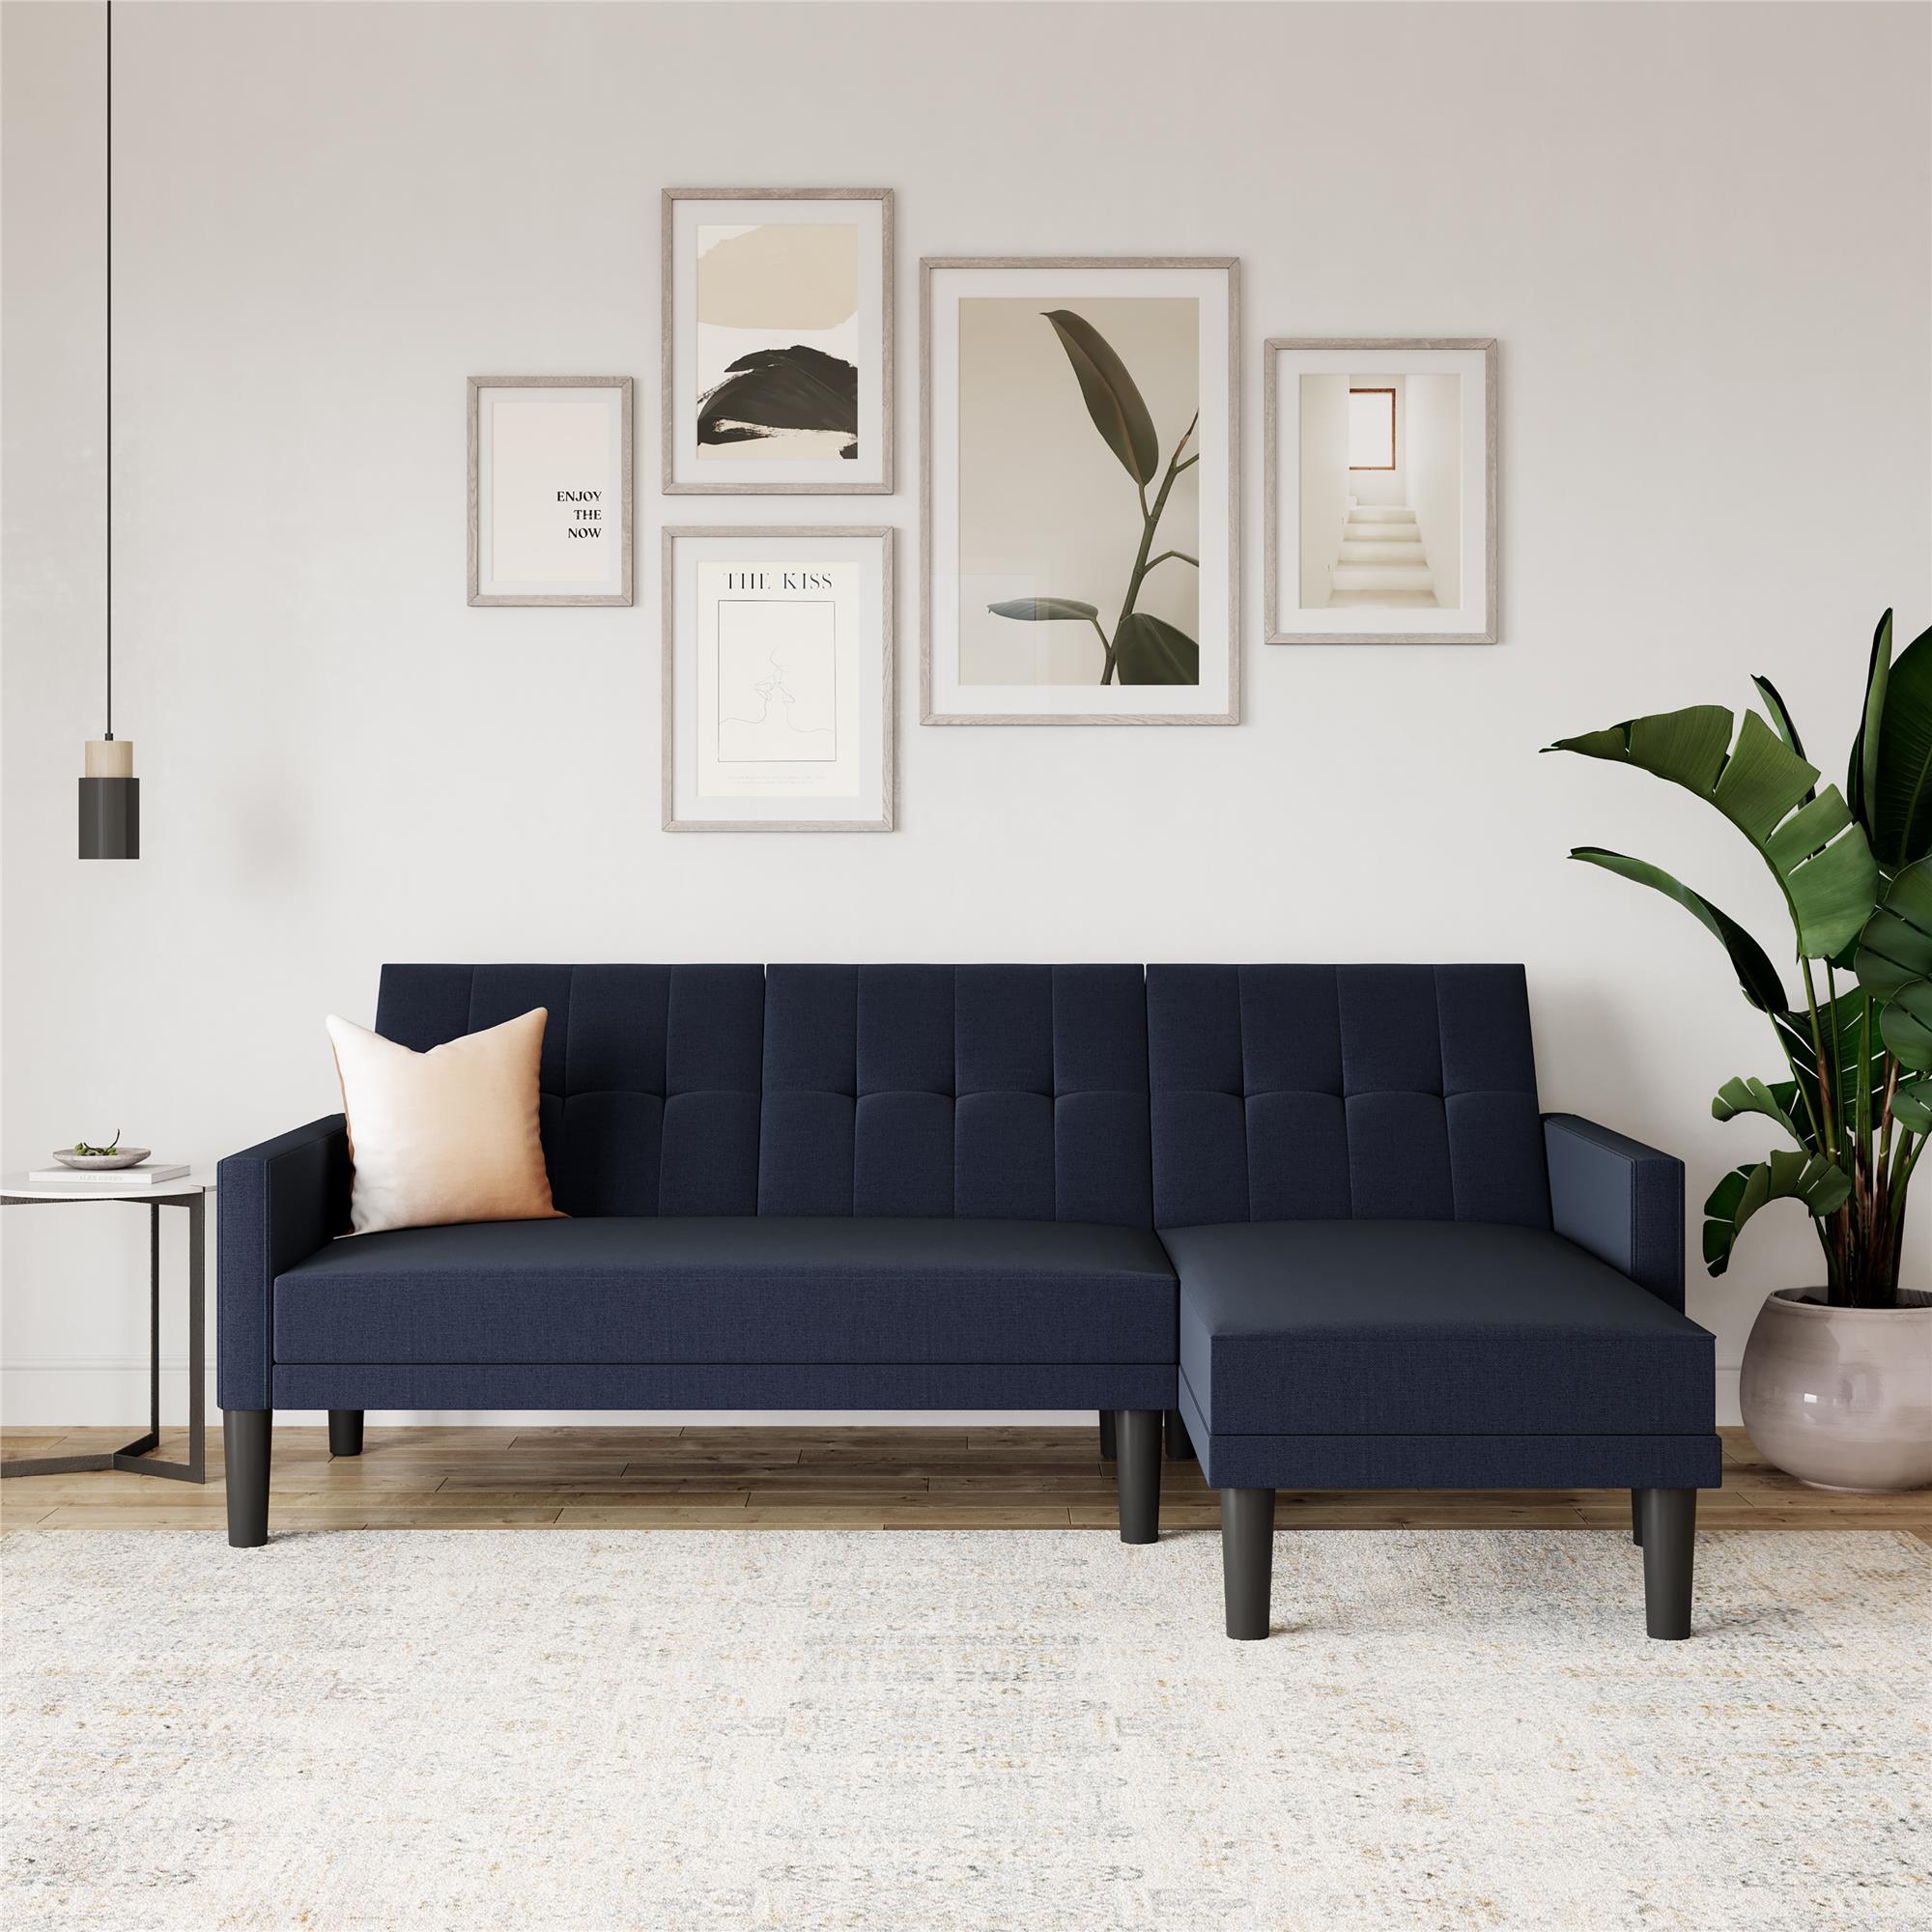 DHP Hudson Small Space Sectional Sofa Futon, Blue Linen - image 3 of 19